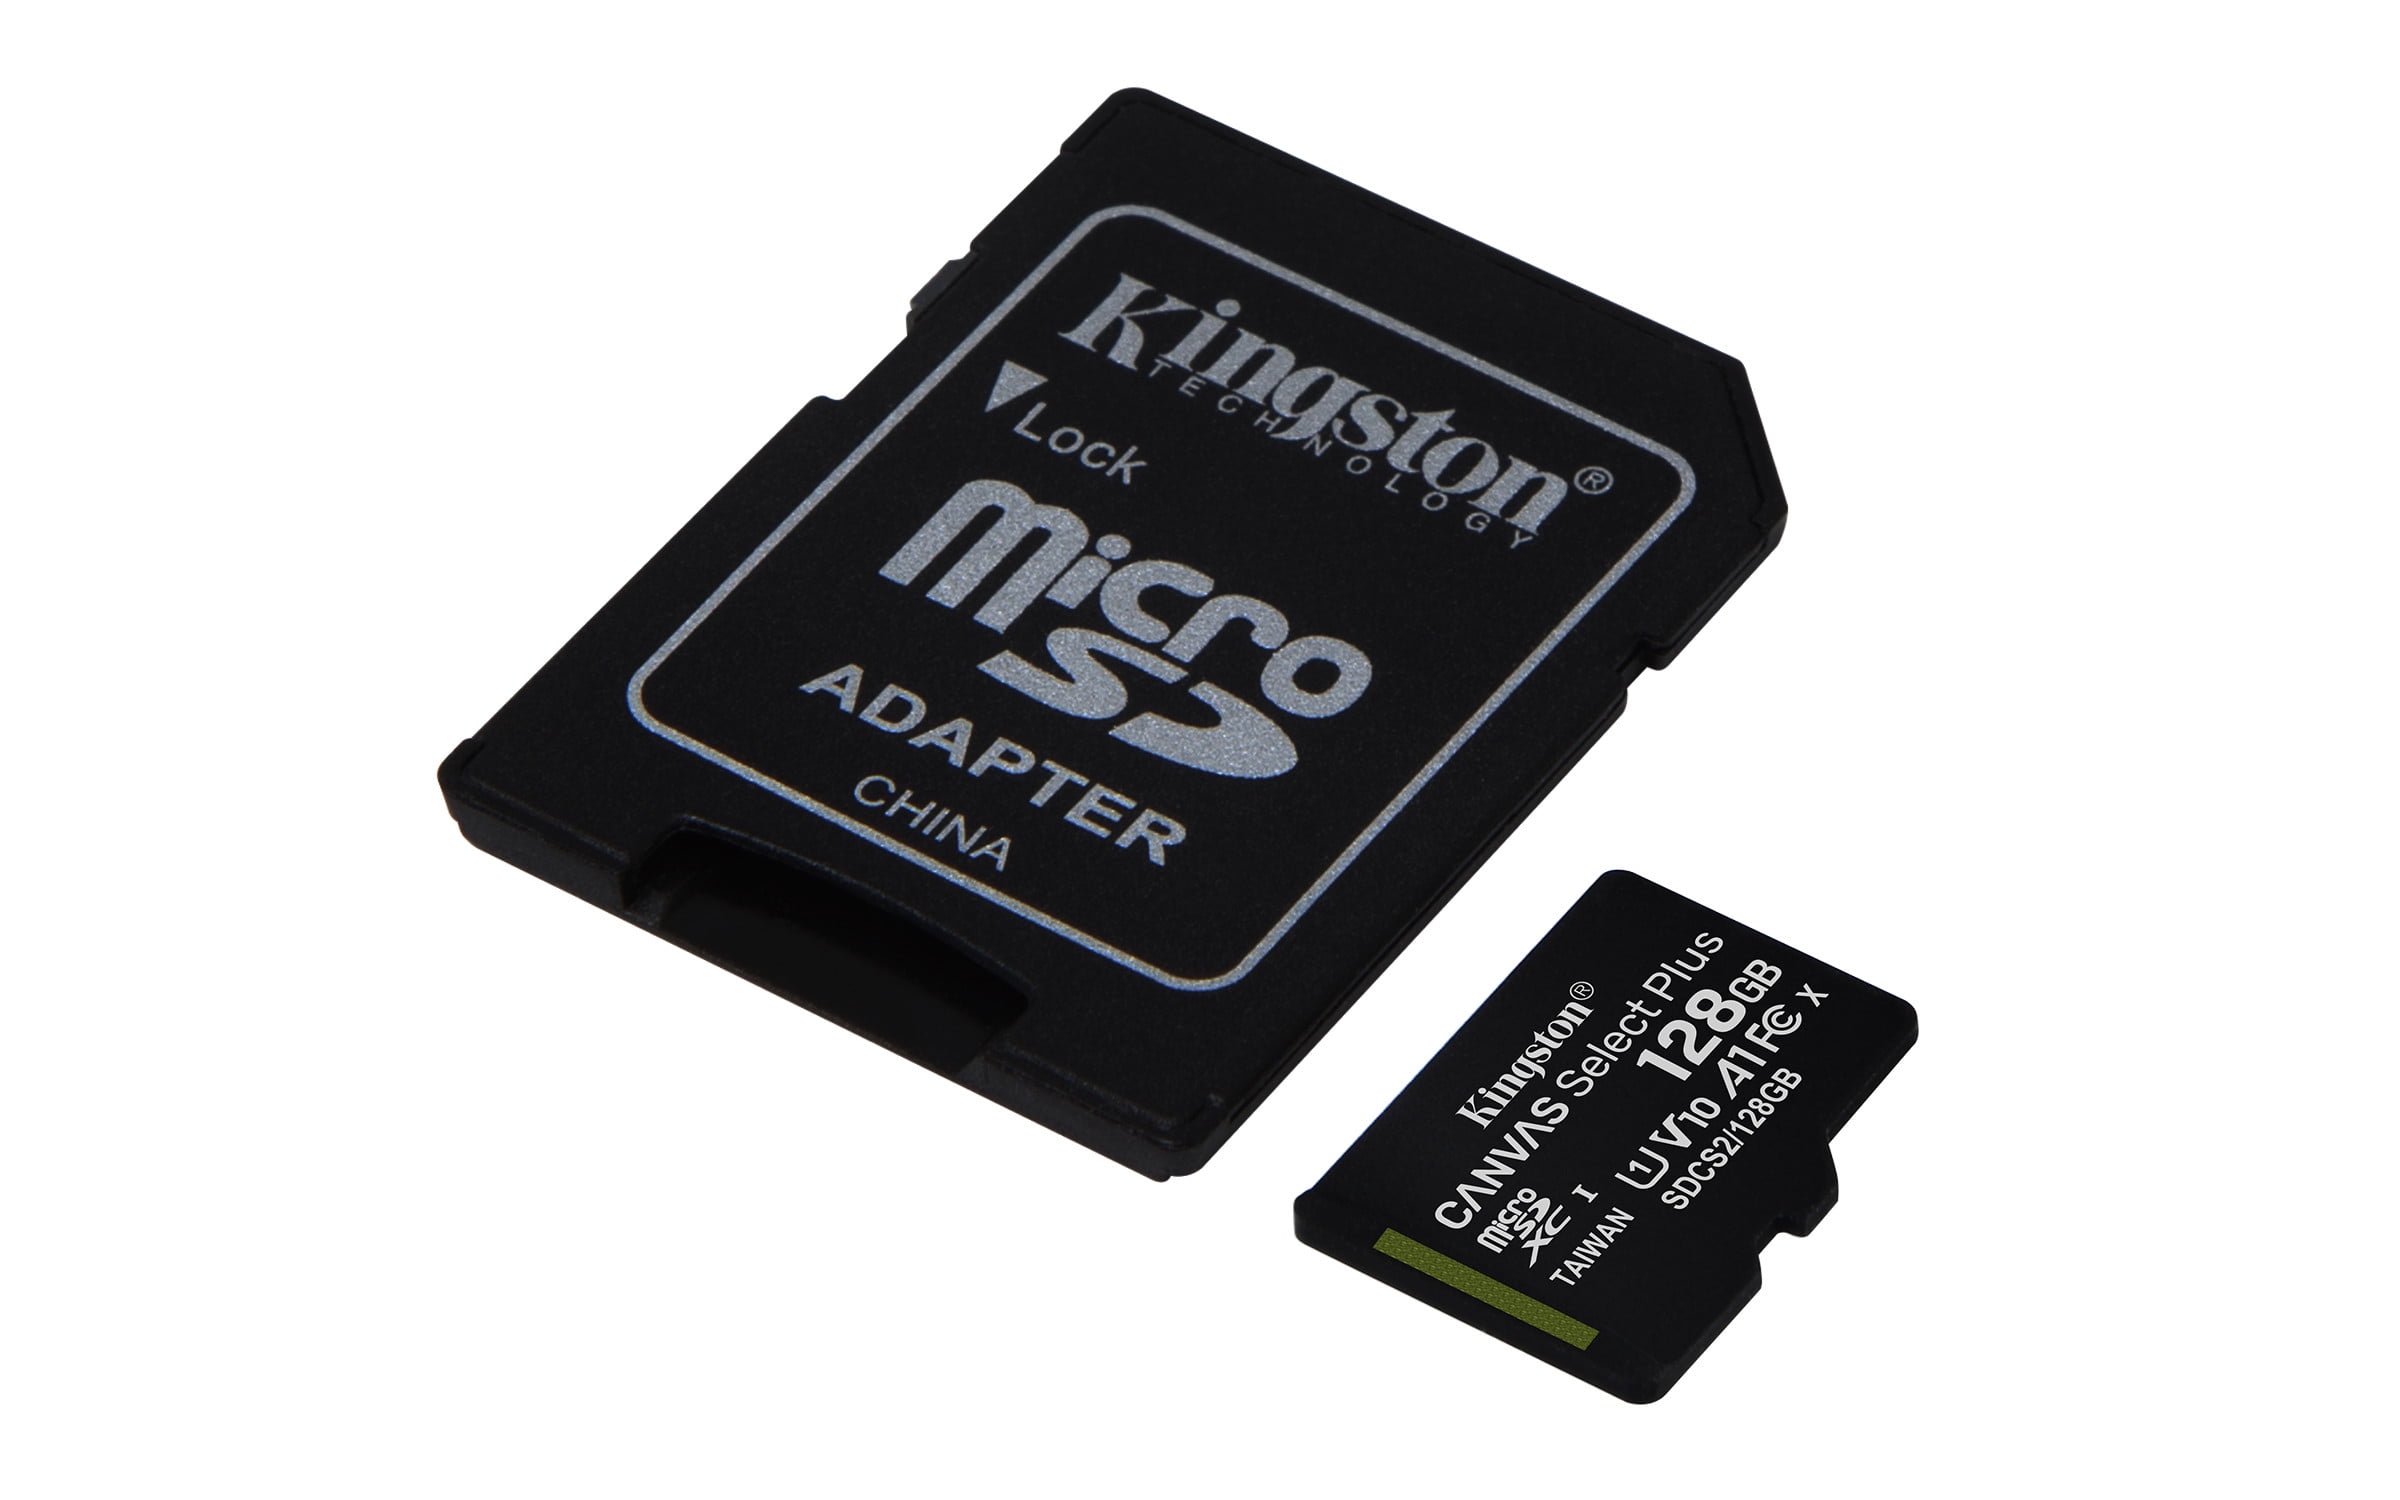 100MBs Works with Kingston Kingston 128GB Honor View 10 MicroSDXC Canvas Select Plus Card Verified by SanFlash. 